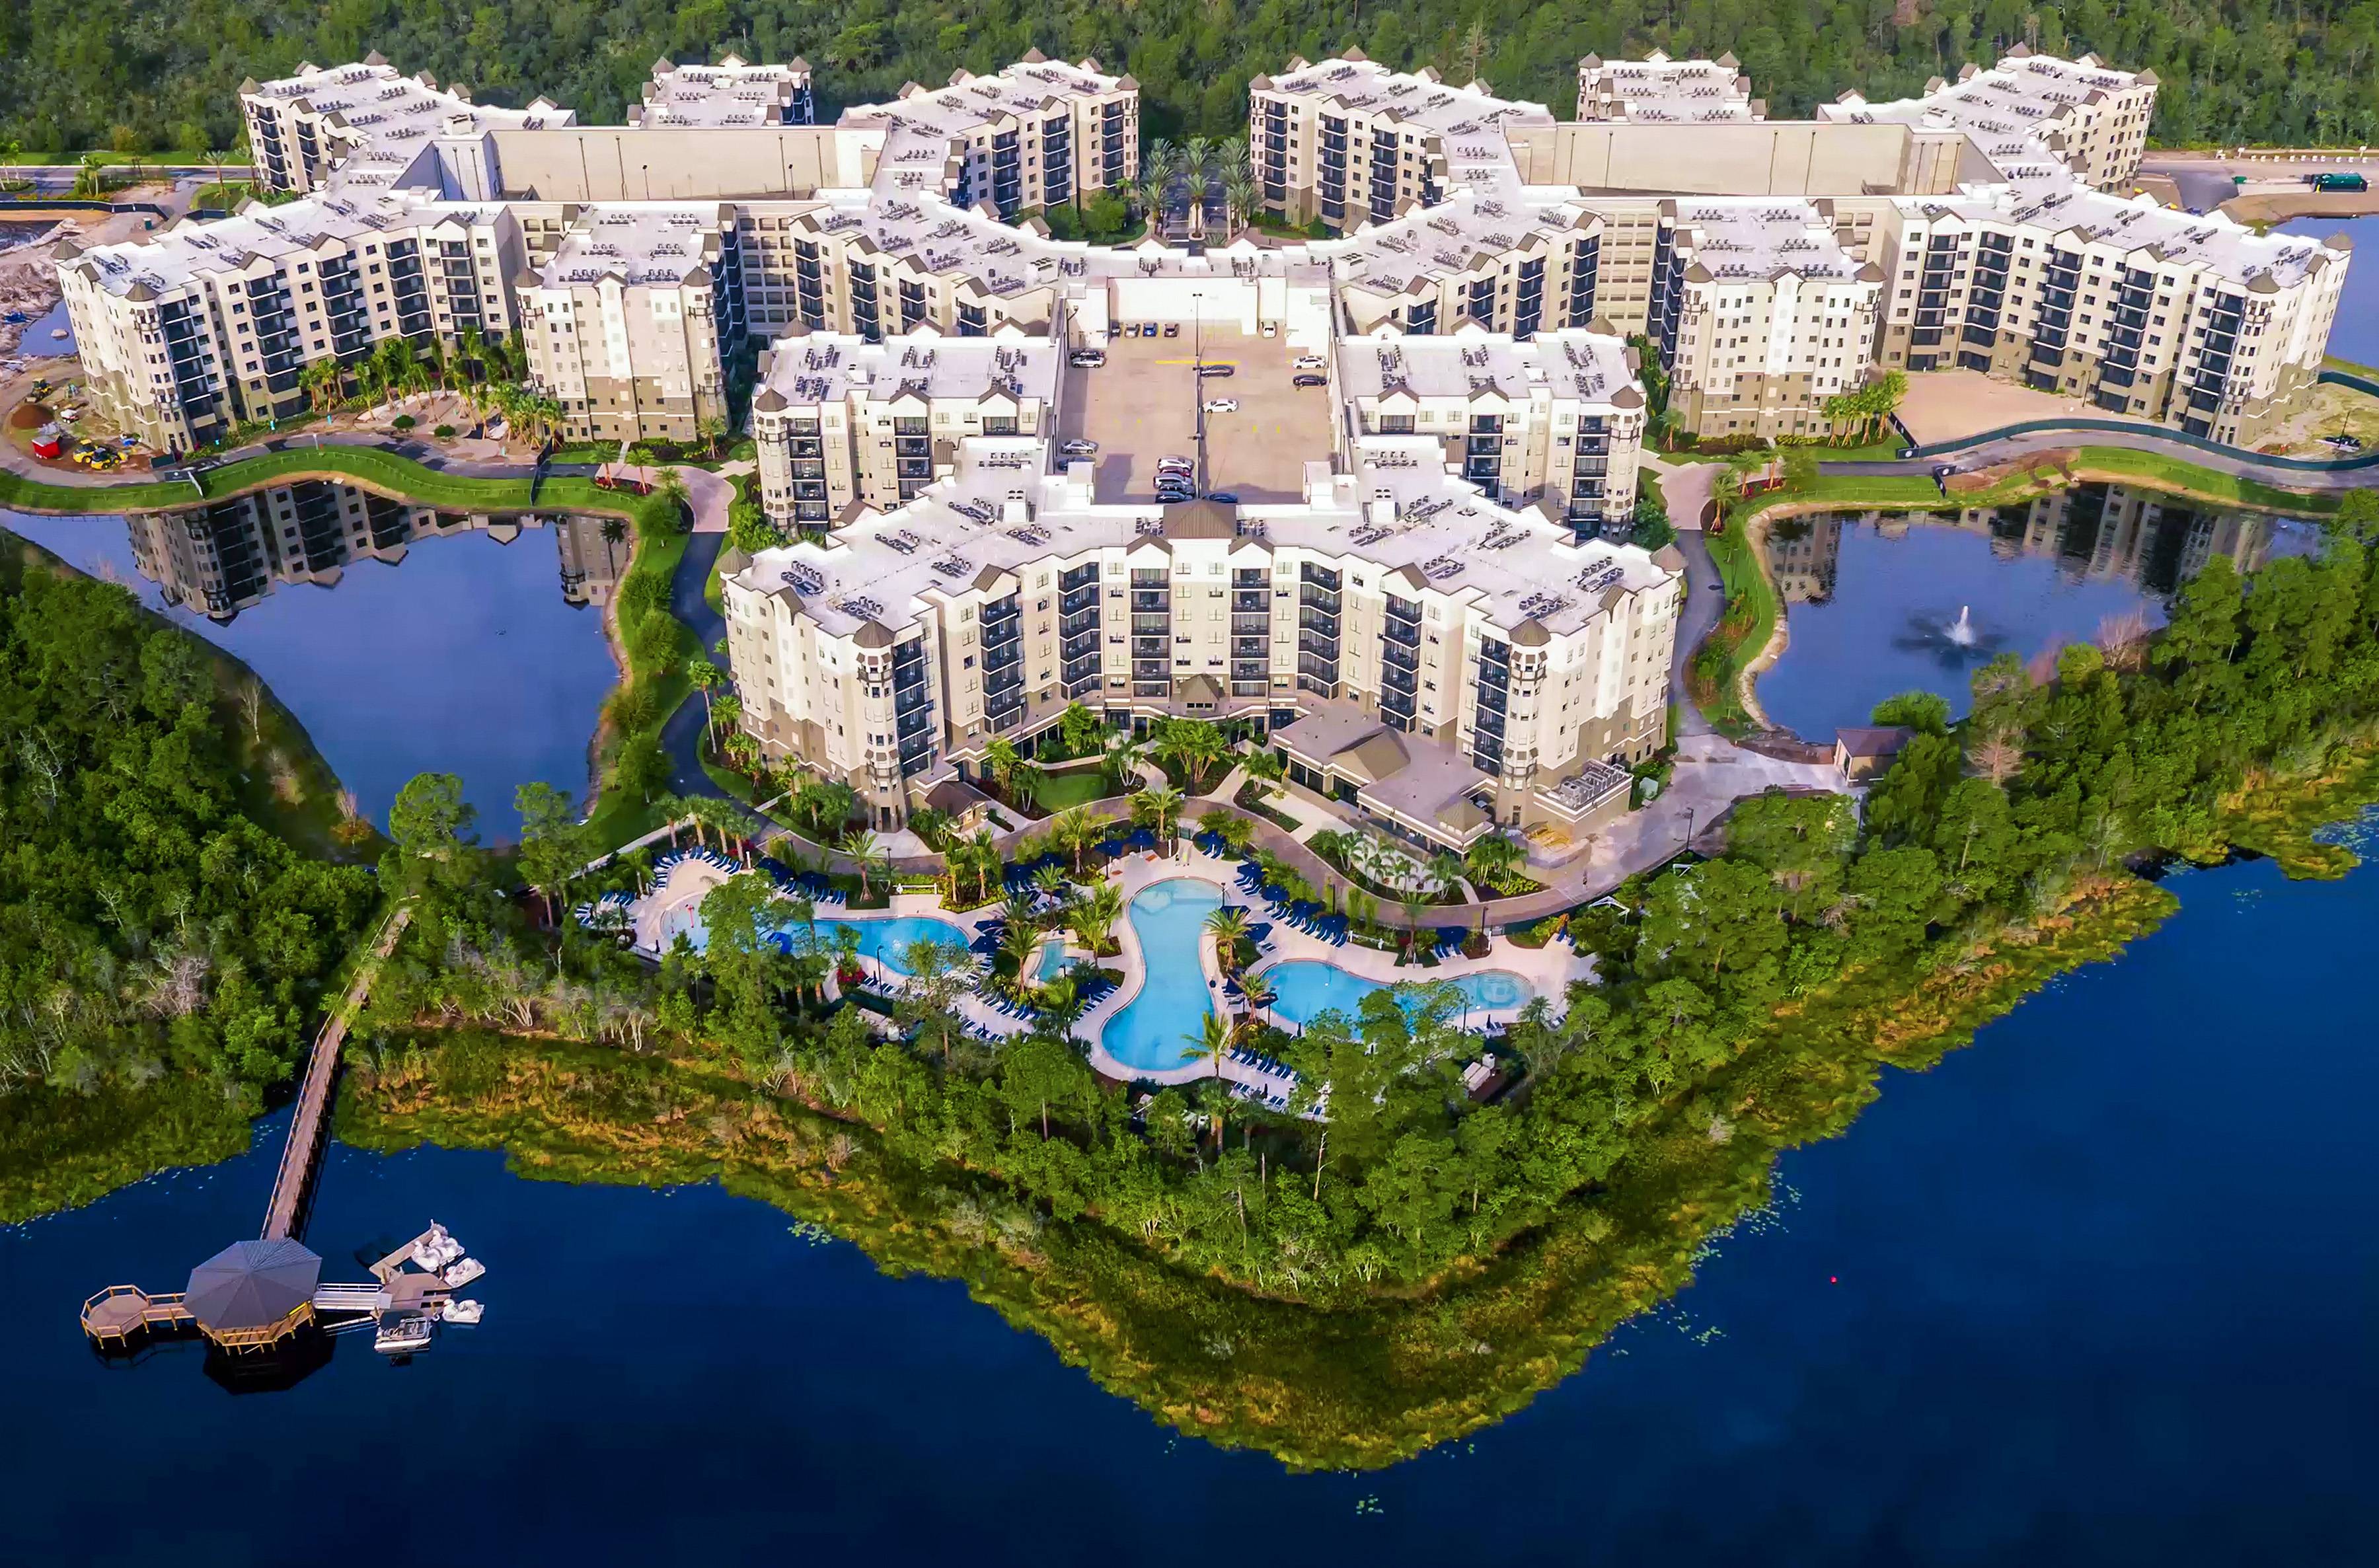 The Grove Resort and Spa Condos for Sale in Orlando ! Florida's Newest Upscale Condo Hotel 5 Mins to Disney World! Incentives available! Condo for Sale Great for Personal Use or Investment! Financing! Waterpark! INCENTIVES!!  New Units Available!